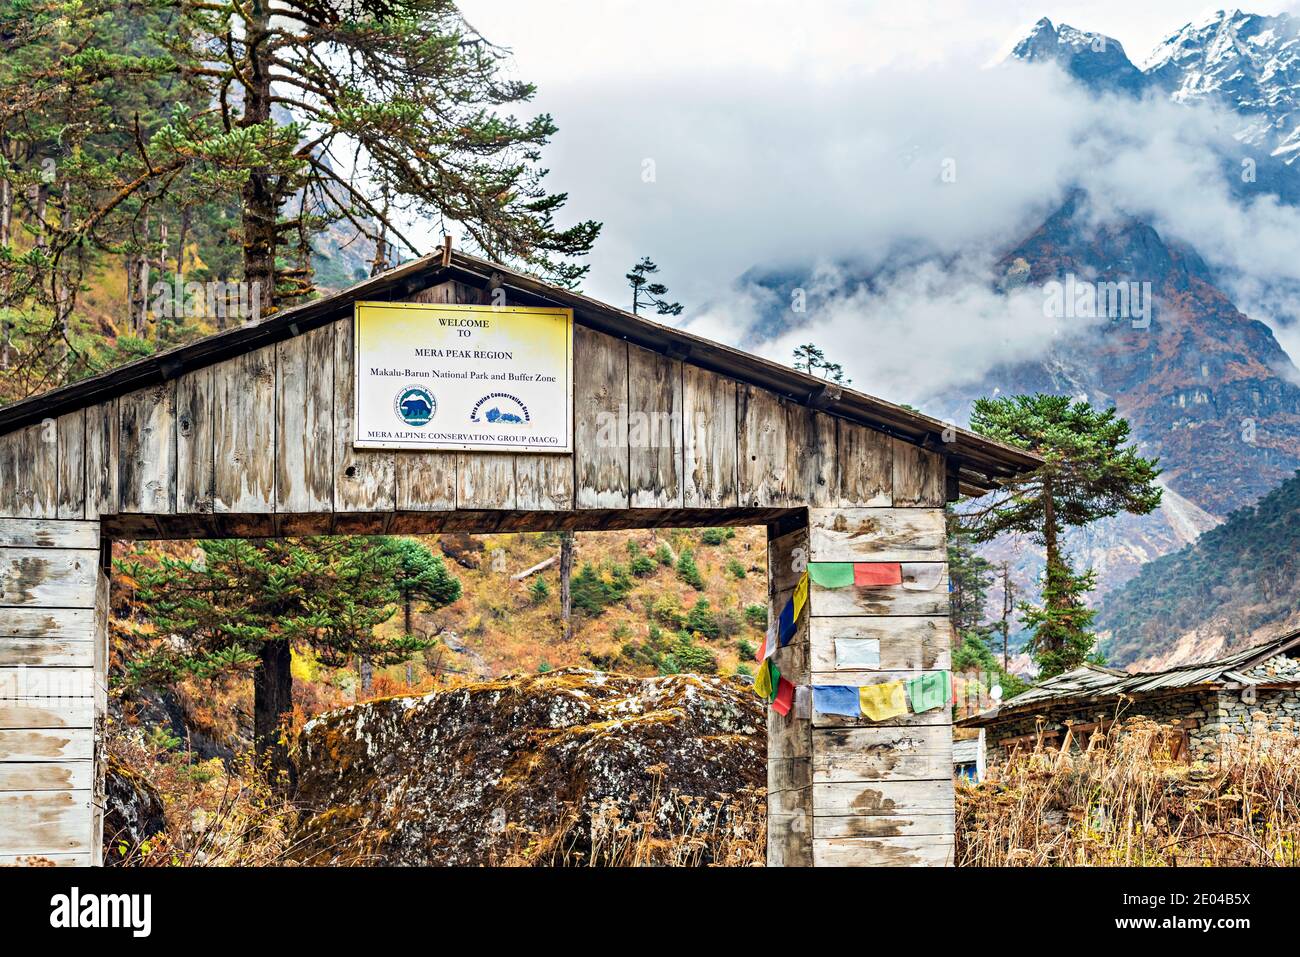 Kothe, Nepal - Nov 29, 2019: View at welcome sign and the Himalayan mountains landscape at Kothe, it is on trekking route to Mera peak in Nepal. Stock Photo